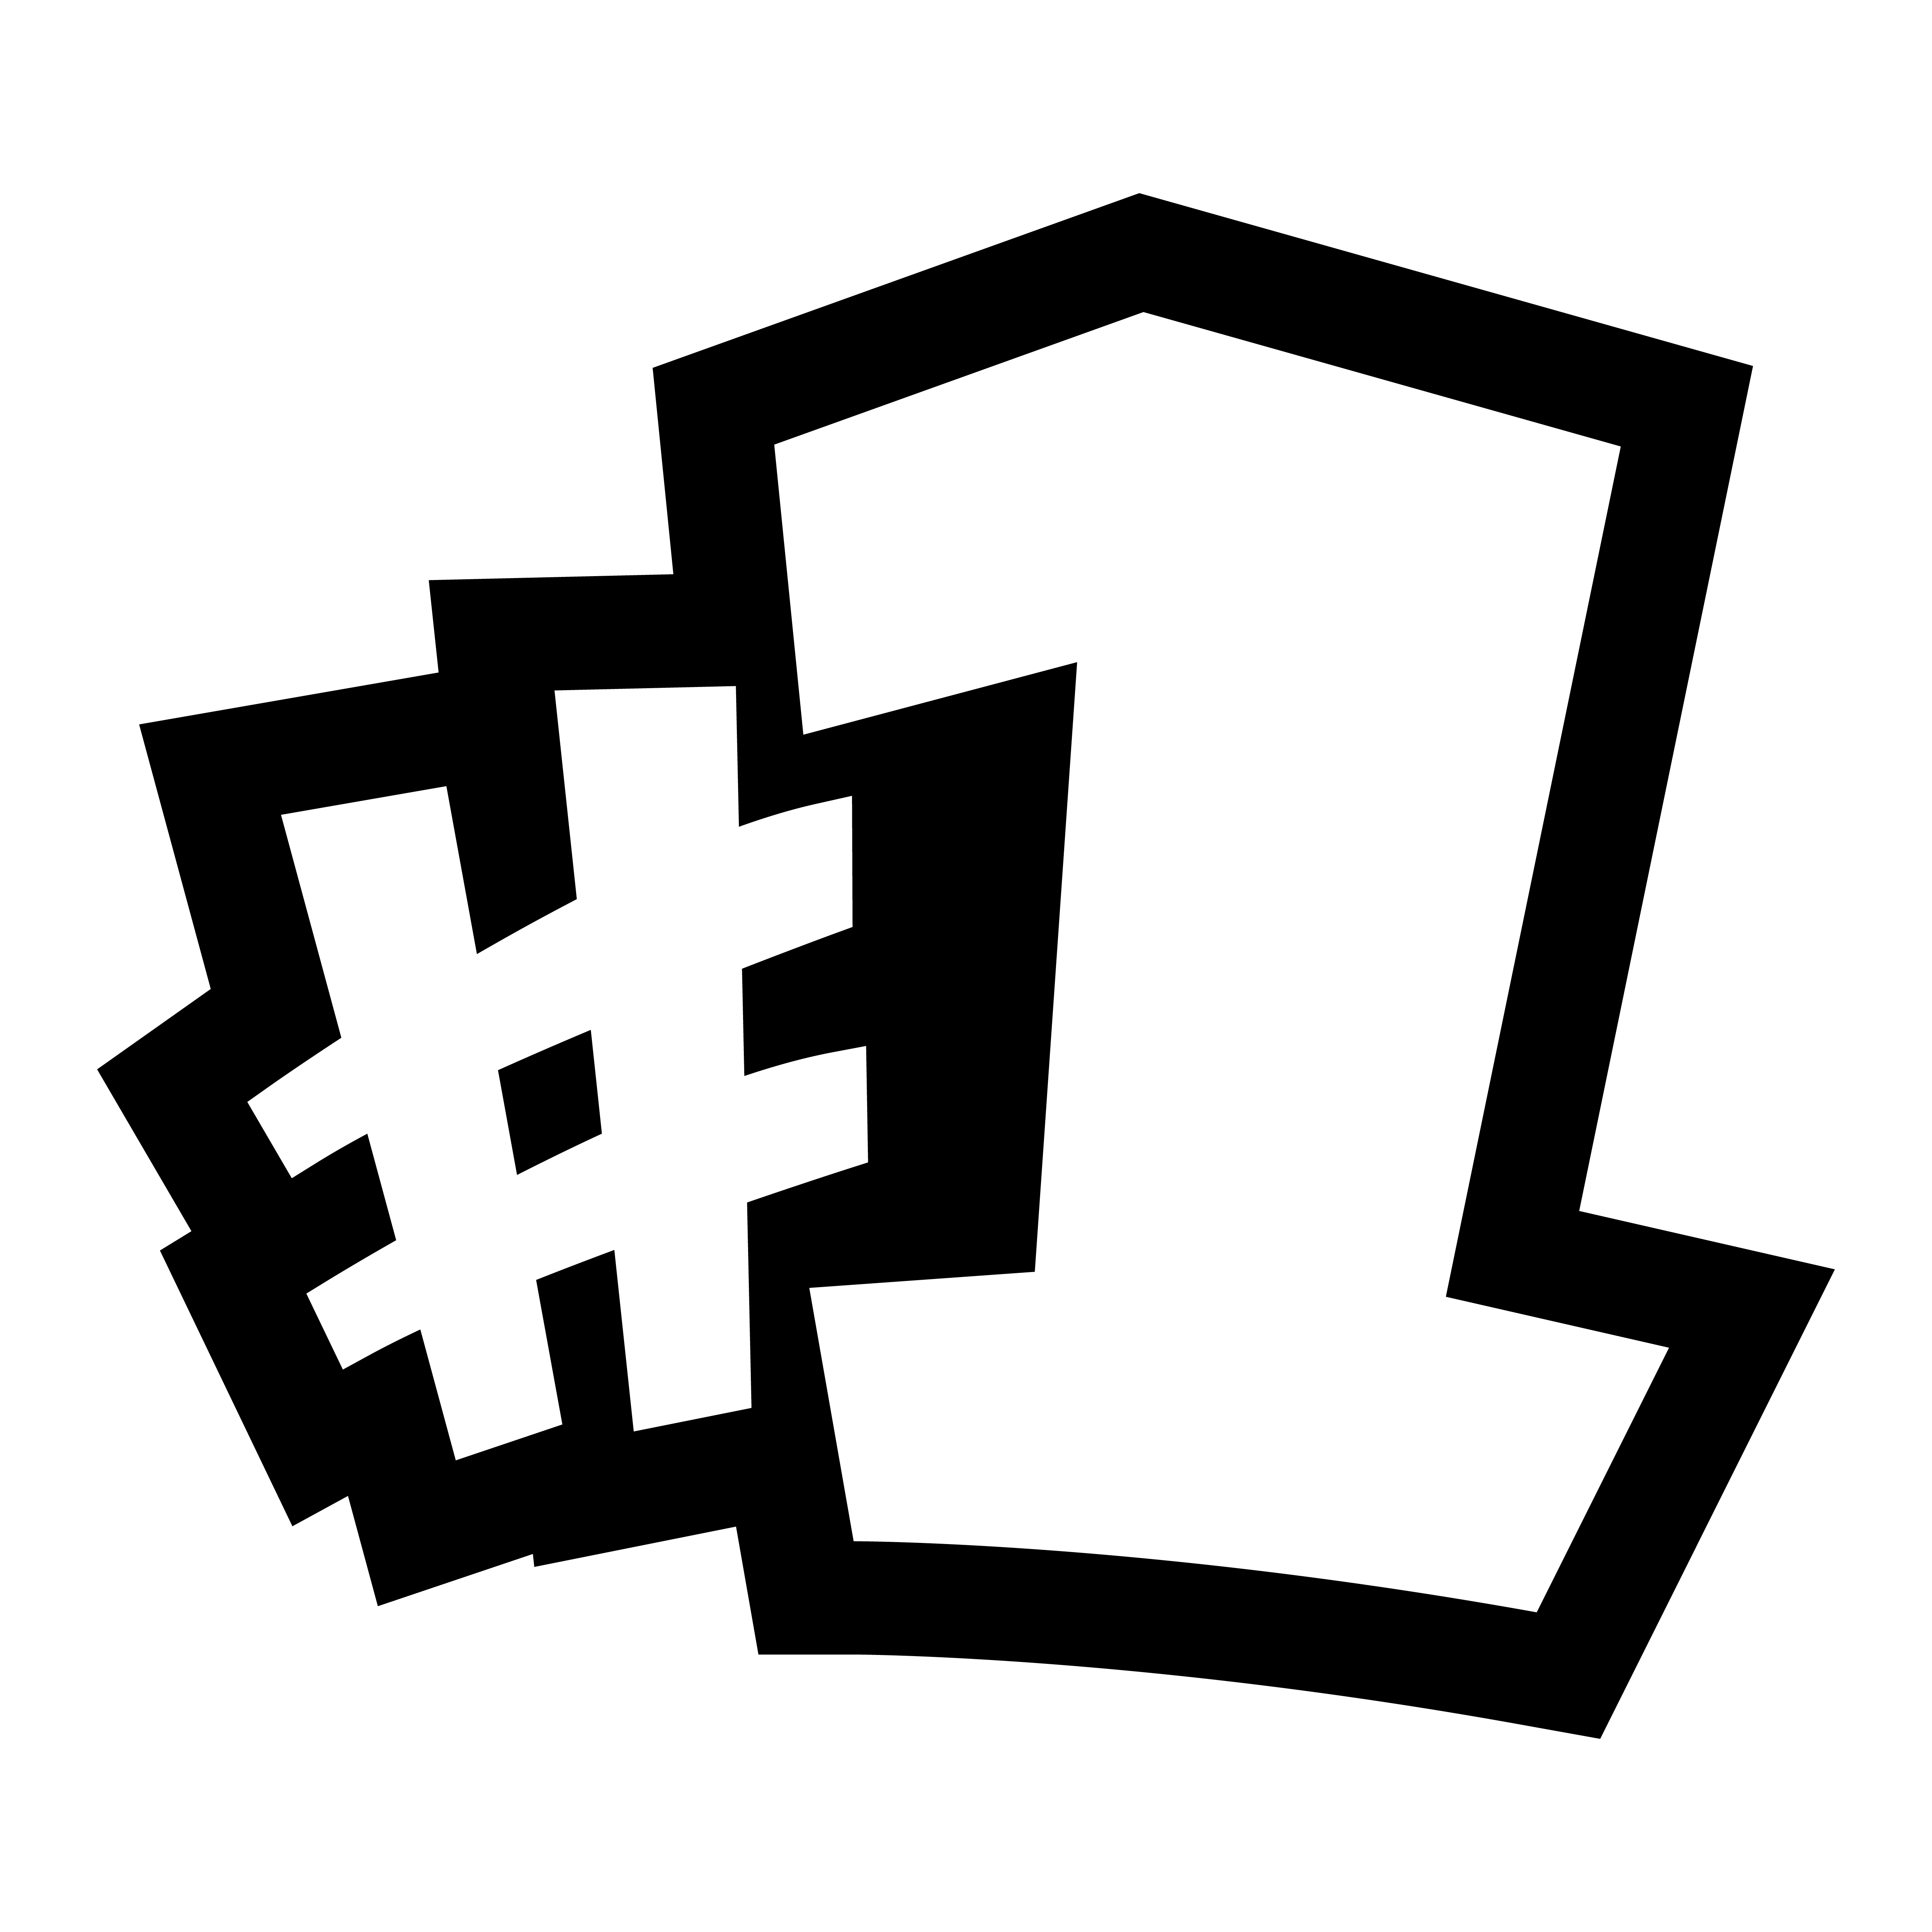 1-number-one-logo-text-graphic-vector.jpg